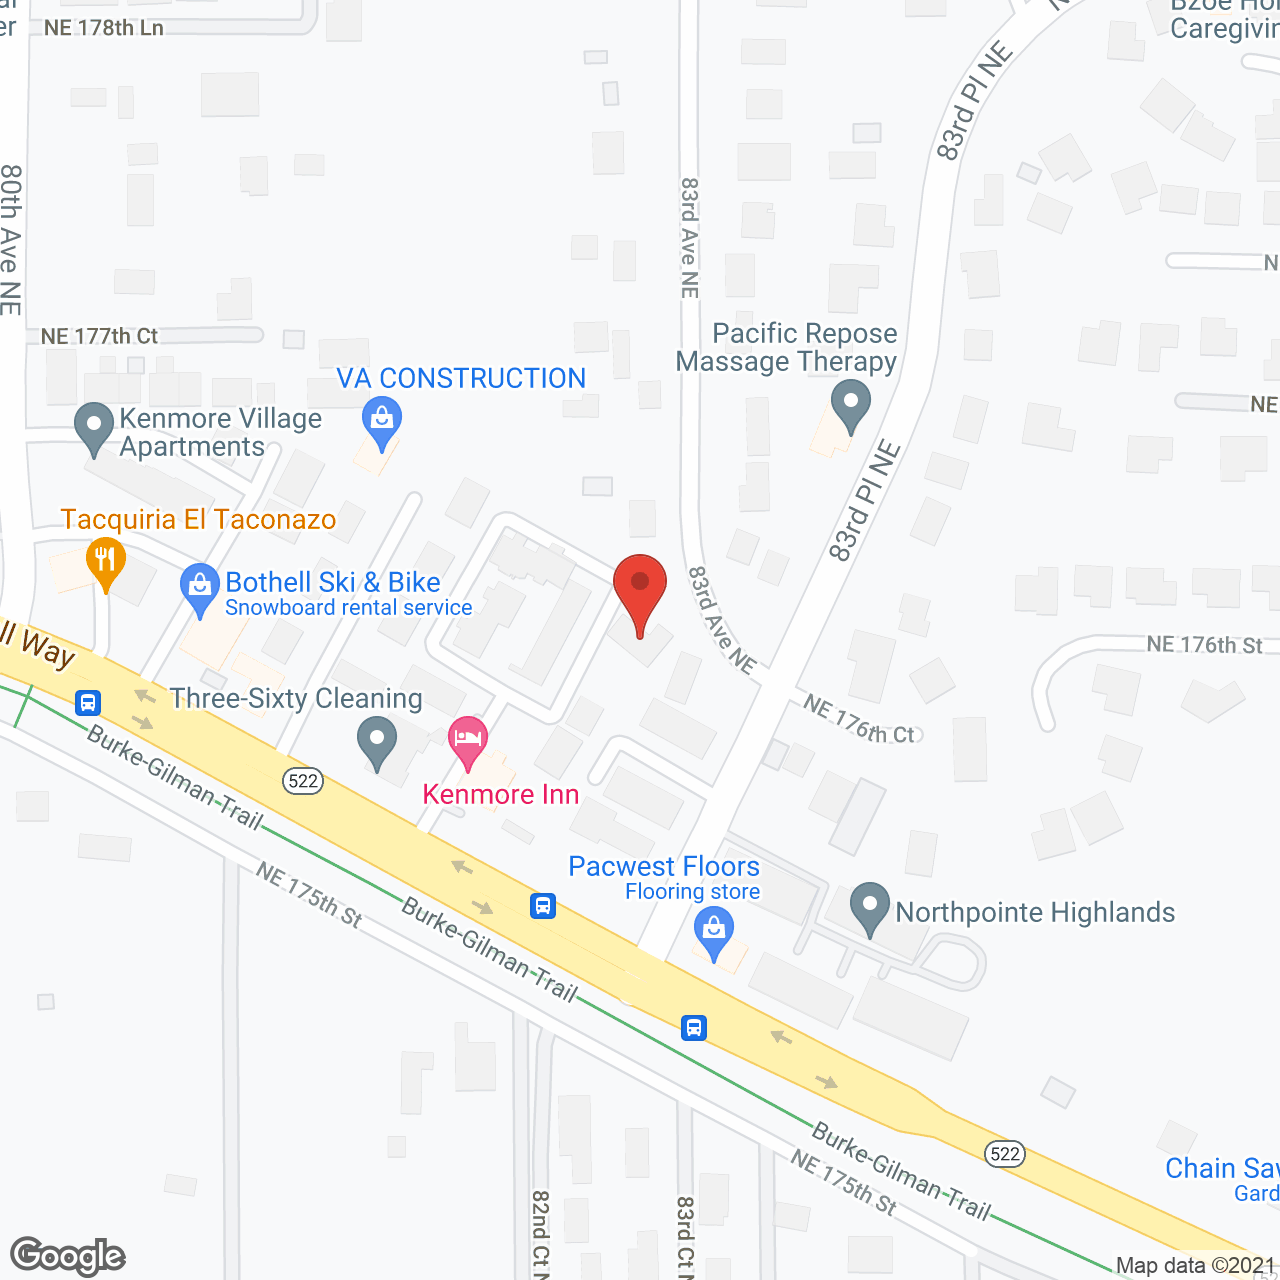 St. Maria AFH in google map